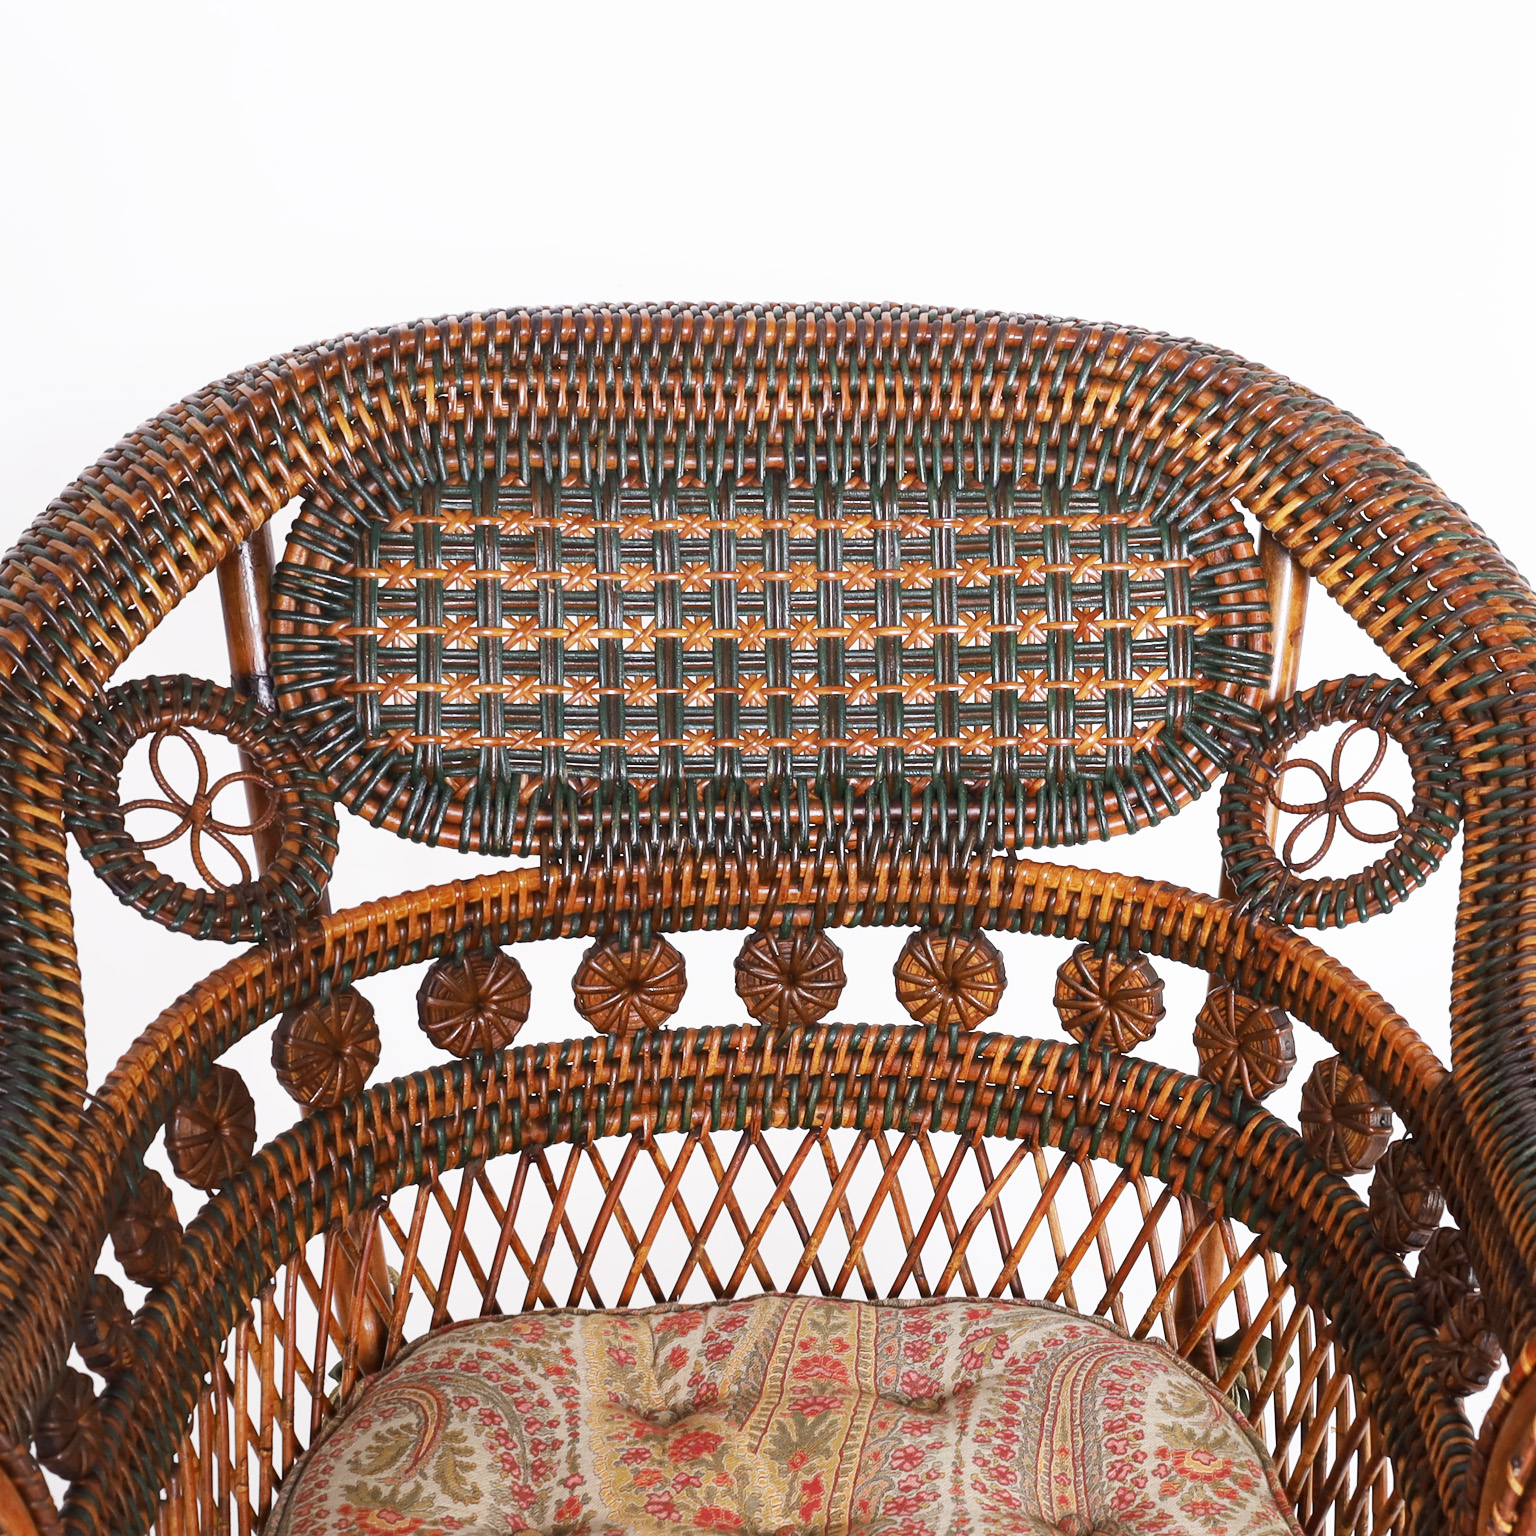 Pair of Antique French Rattan Cafe Chairs